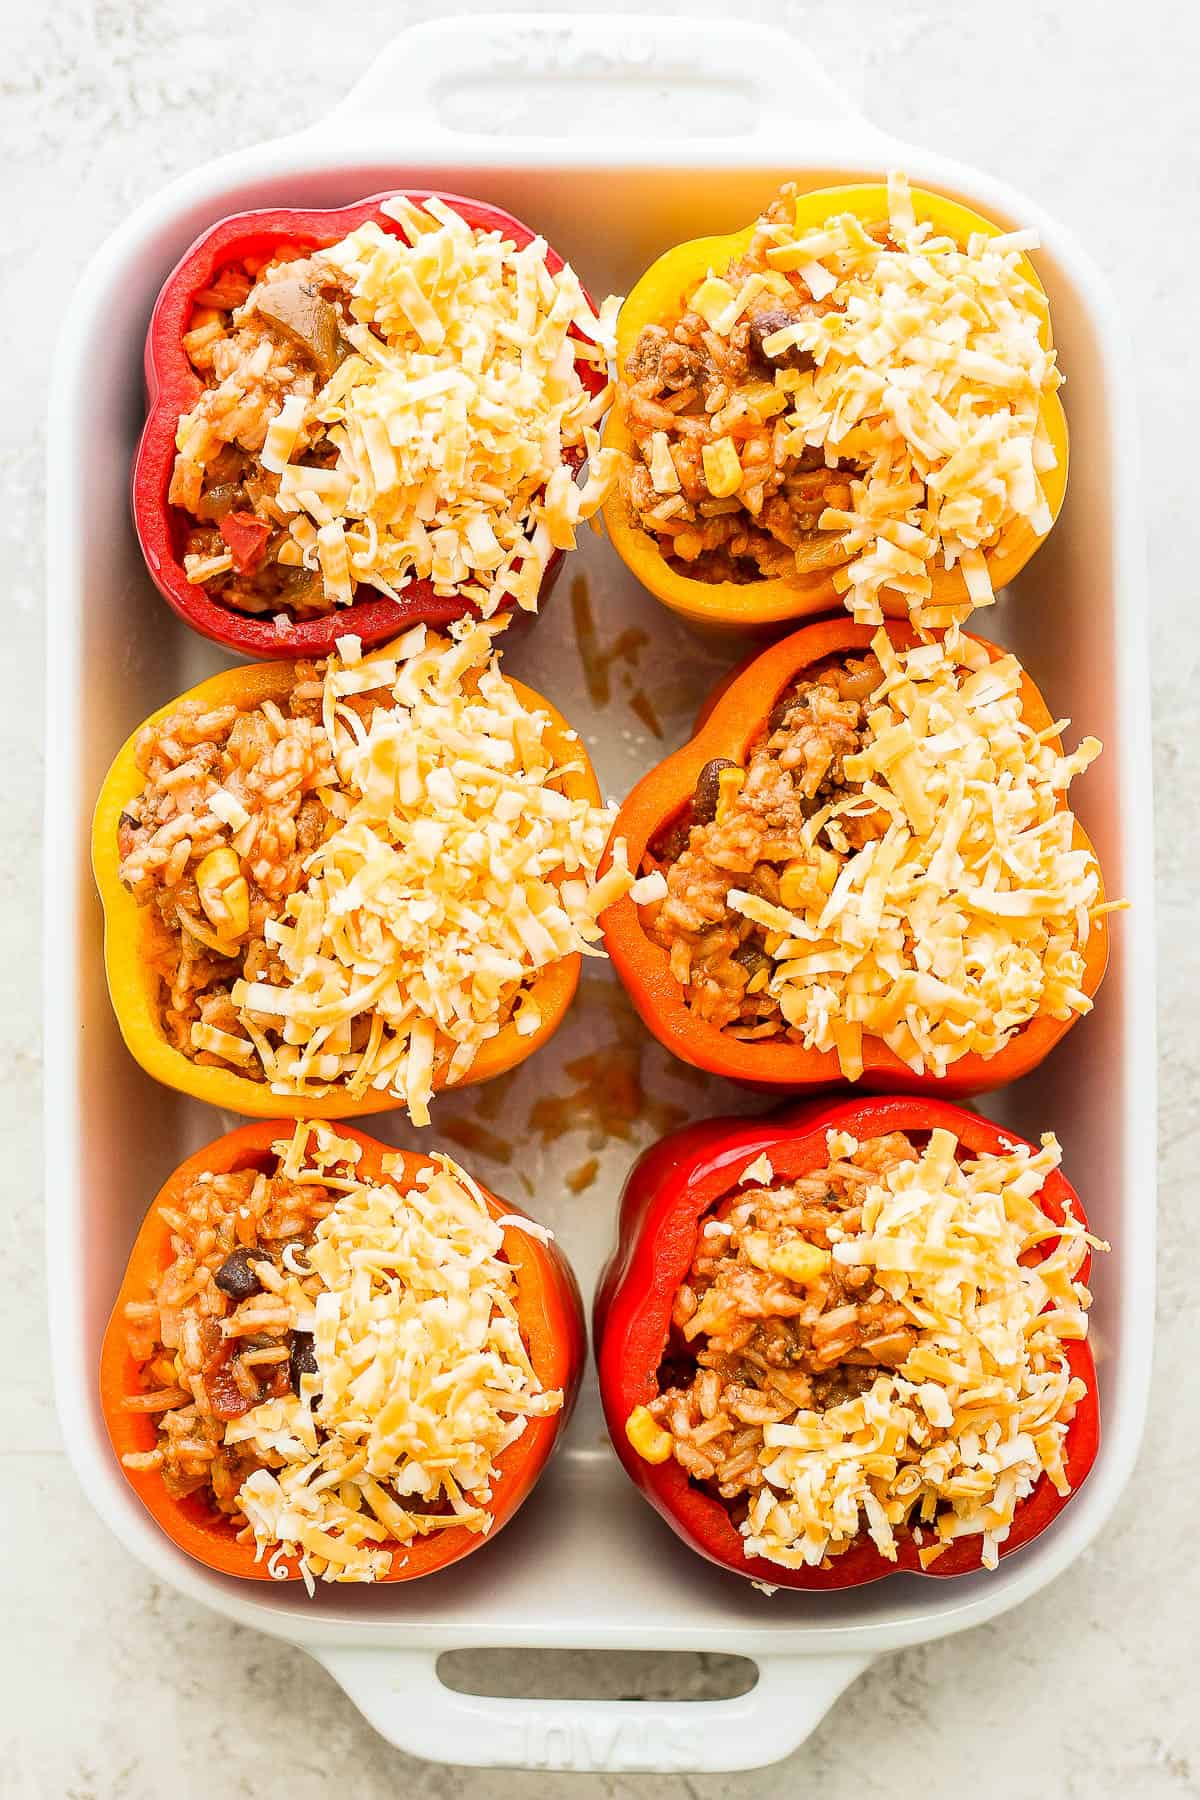 Same stuffed bell peppers in a pan topped with cheese.